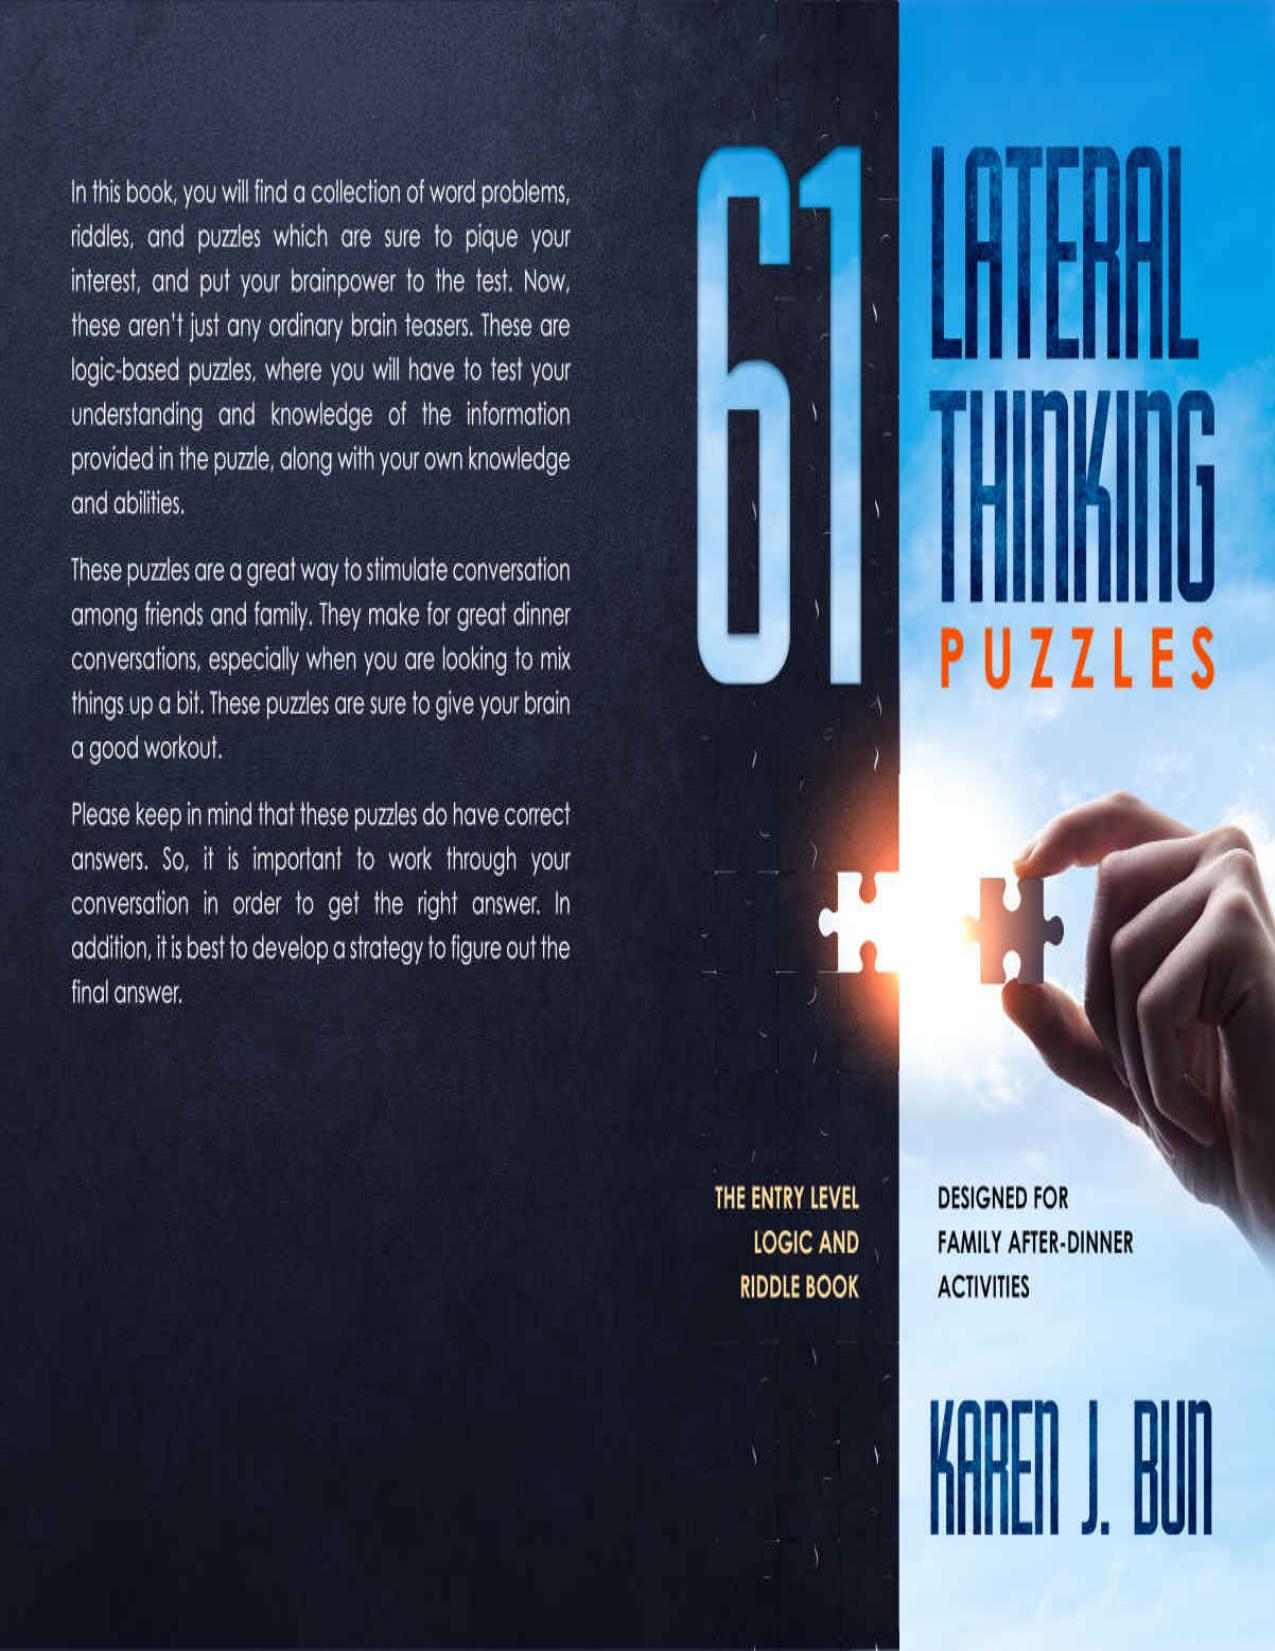 61 Lateral Thinking Puzzles: The Entry Level Logic And Riddle Book Designed For Family After-Dinner Activities by Karen J. Bun